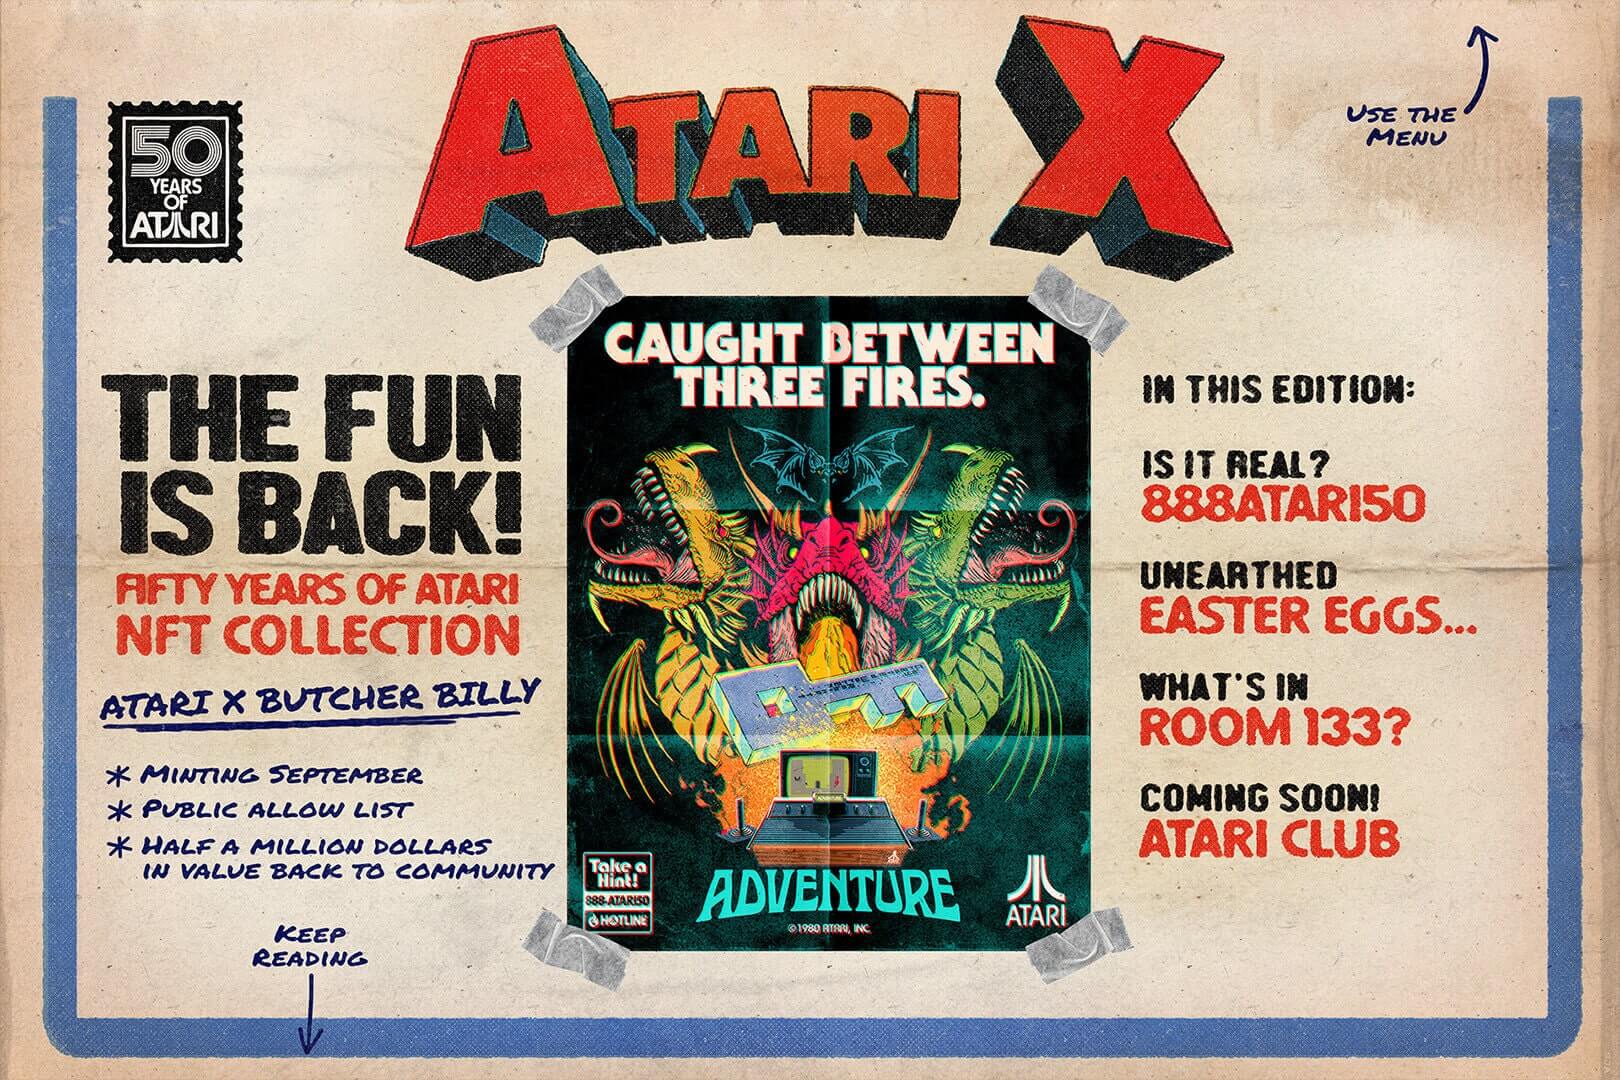 A retro-style poster showing off the Atari 50th anniversary NFT collection, with a smaller poster in the middle and a list of things to expect from the collection including a September mint date and an ad for Room 133